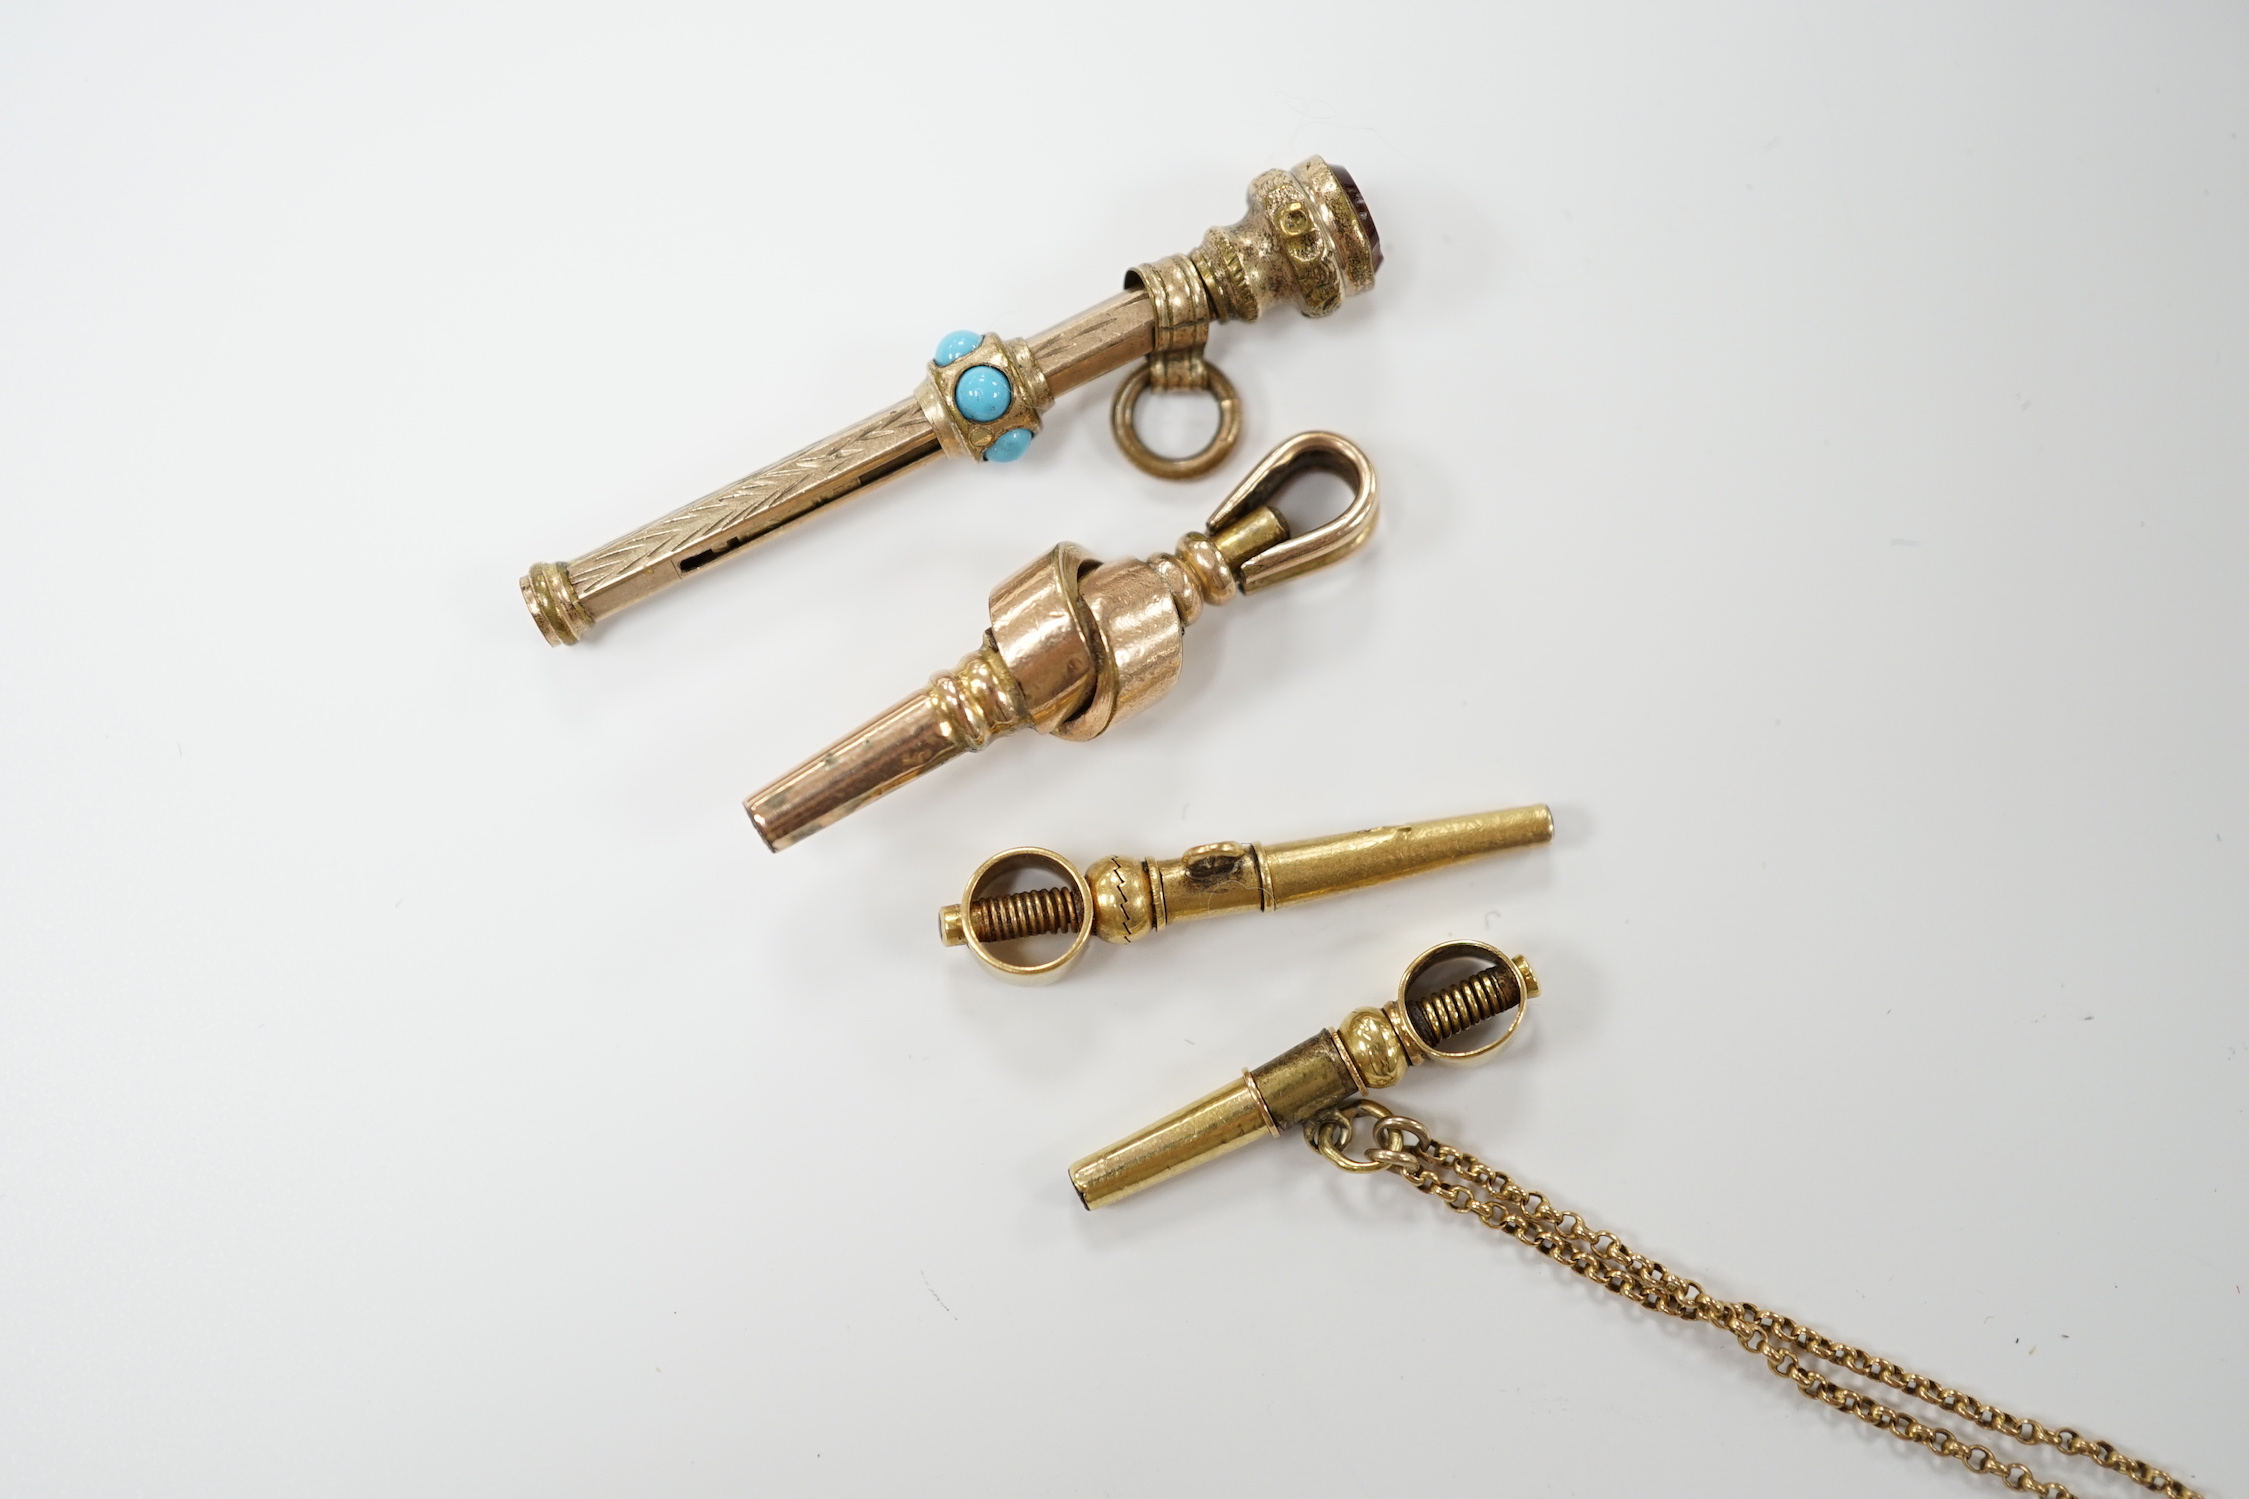 Three 19th century yellow metal overlaid watch keys and a similar propelling pencil, 40mm.